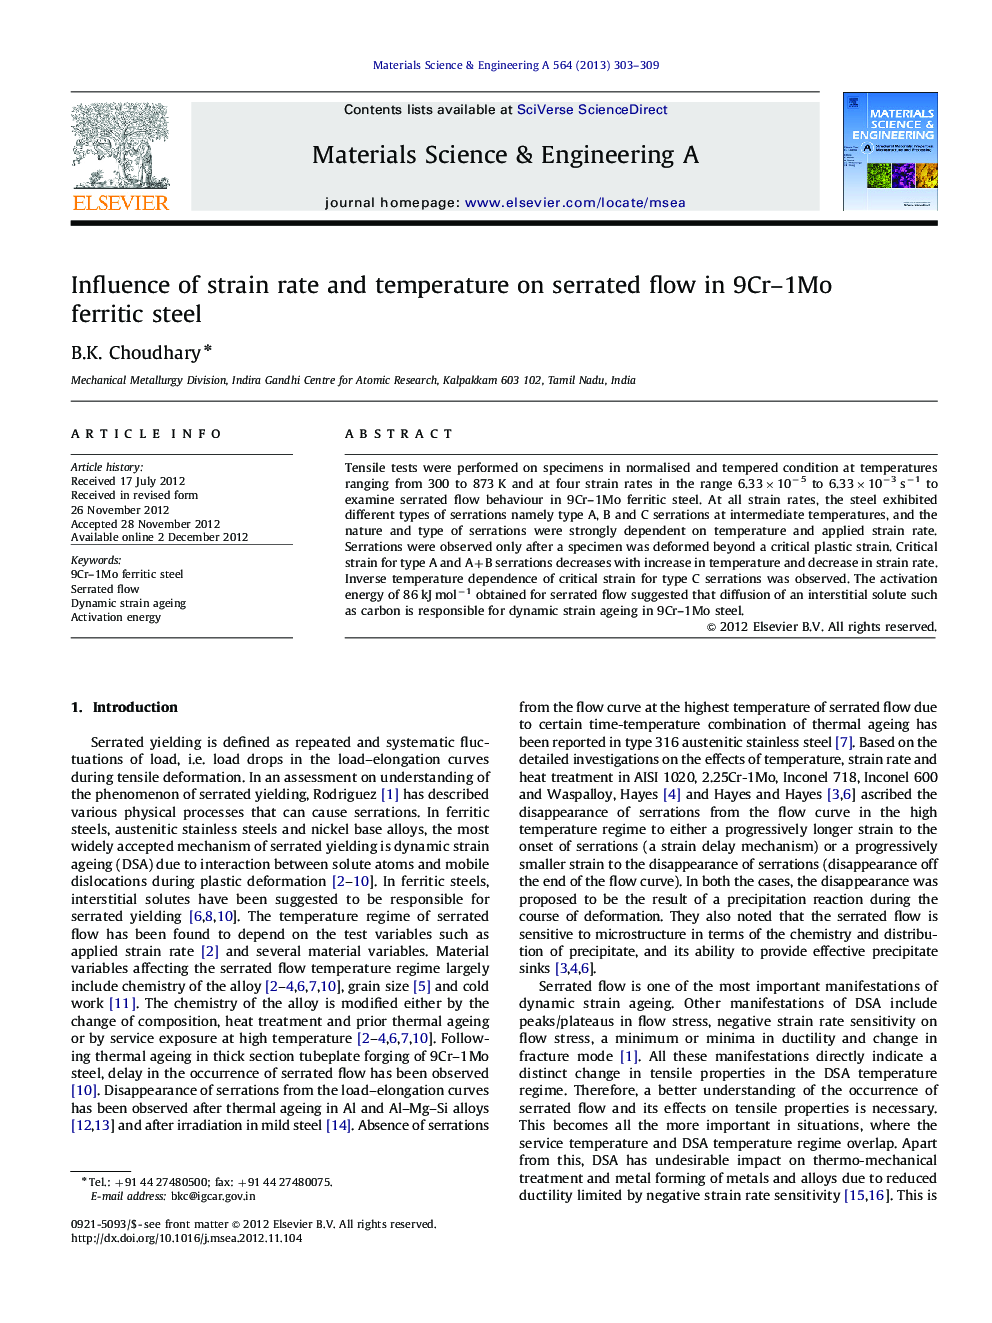 Influence of strain rate and temperature on serrated flow in 9Cr-1Mo ferritic steel